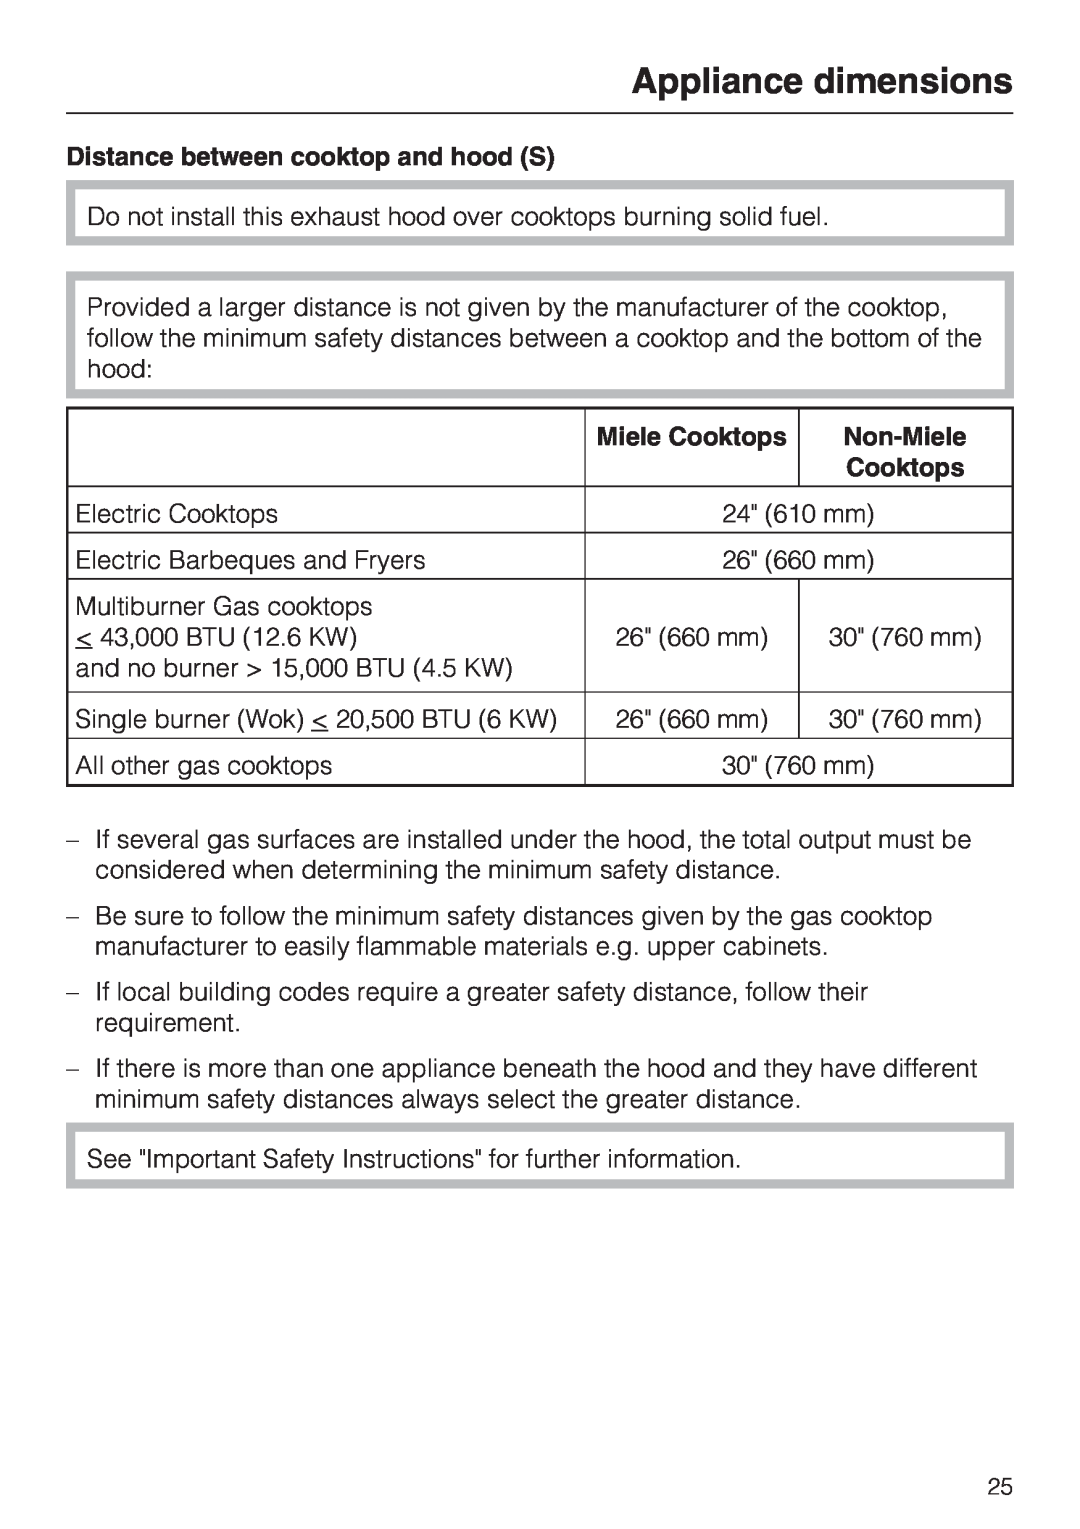 Miele DA 220-4 Appliance dimensions, Distance between cooktop and hood S, Miele Cooktops, Non-Miele 